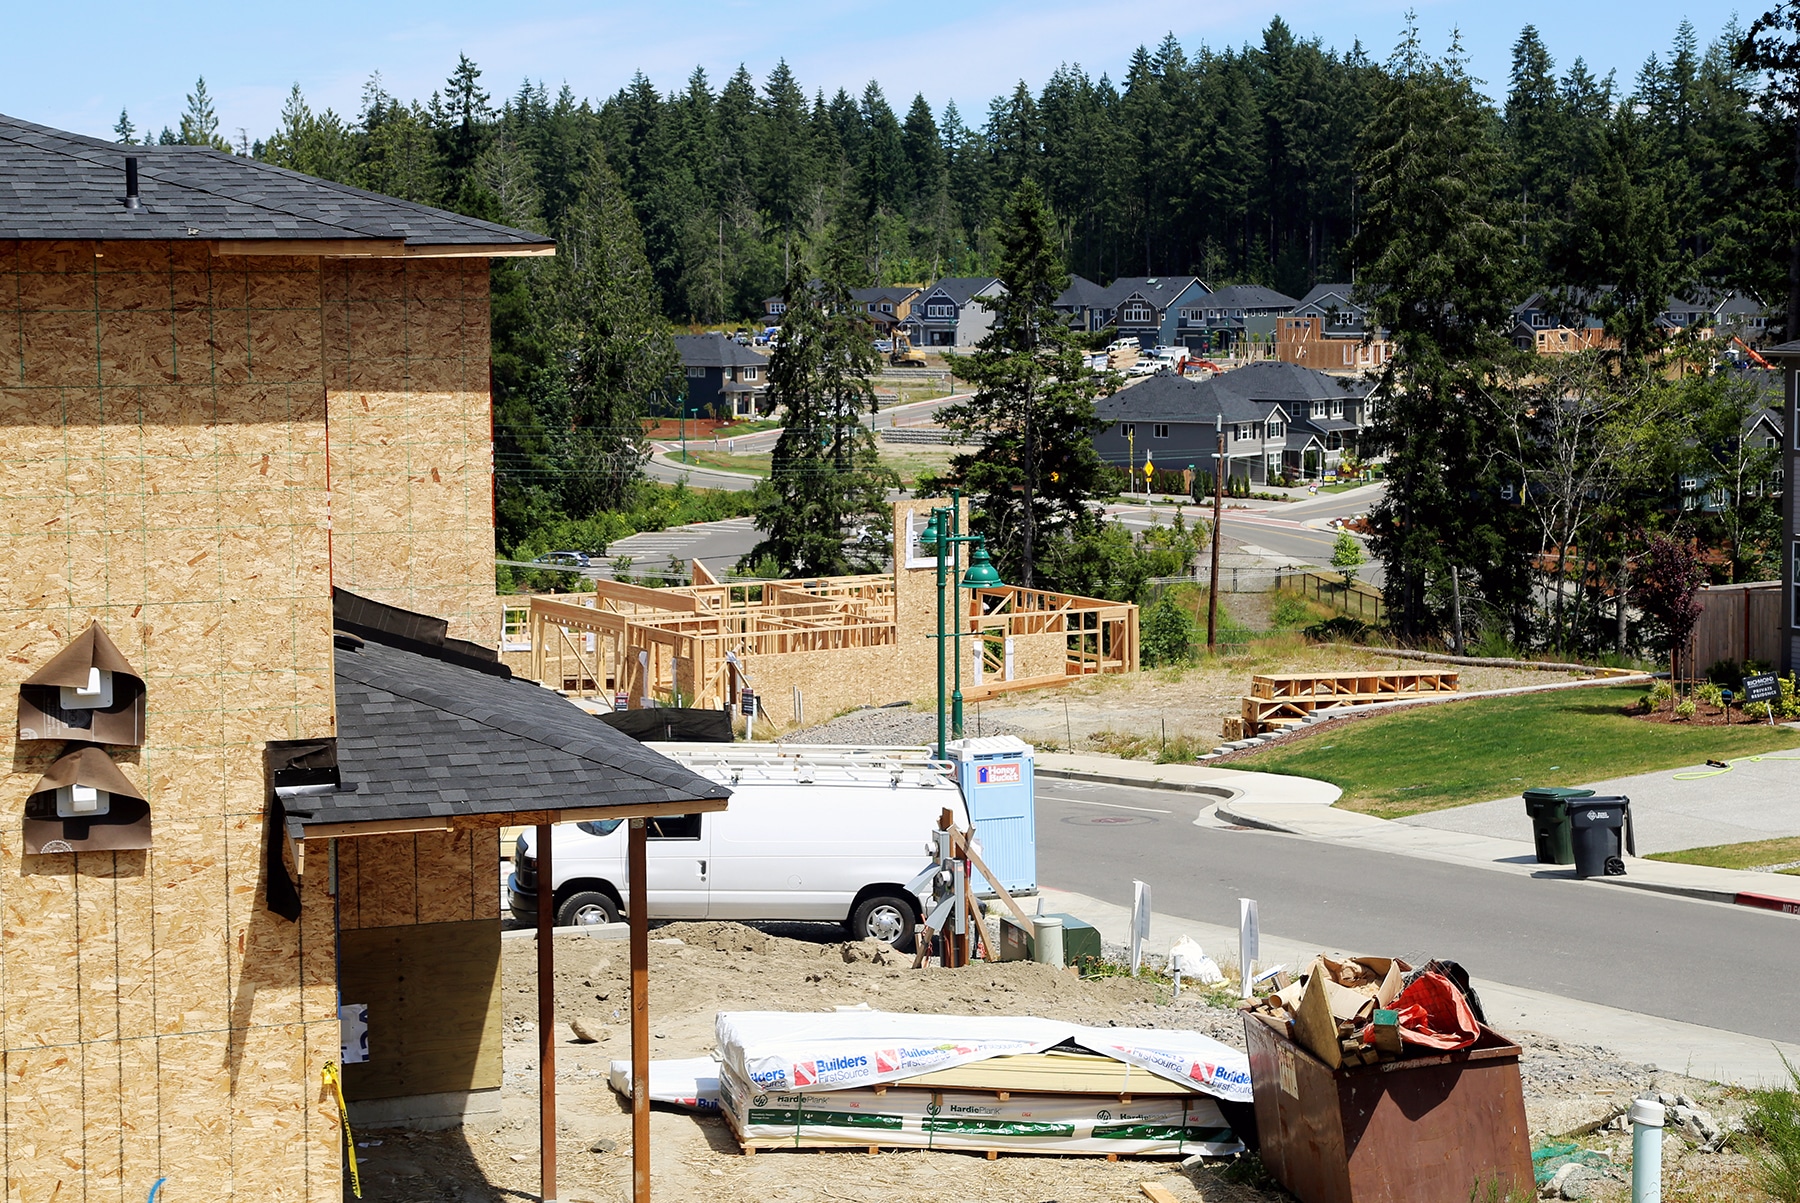 More growth seen for Gig Harbor, but not like in the '10s Gig Harbor